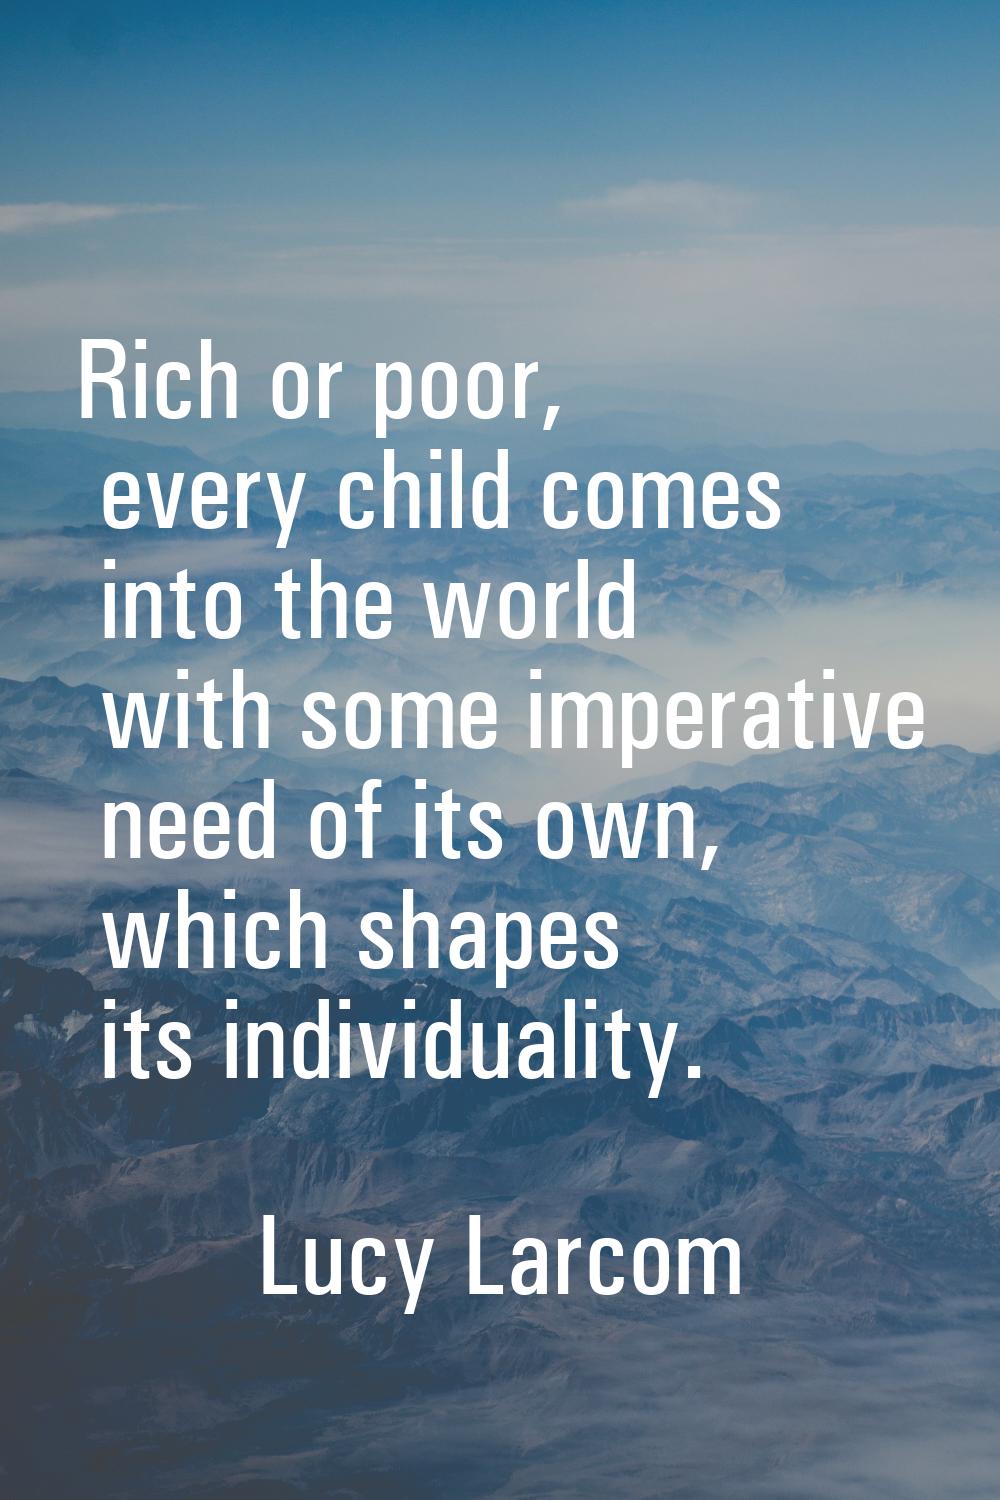 Rich or poor, every child comes into the world with some imperative need of its own, which shapes i